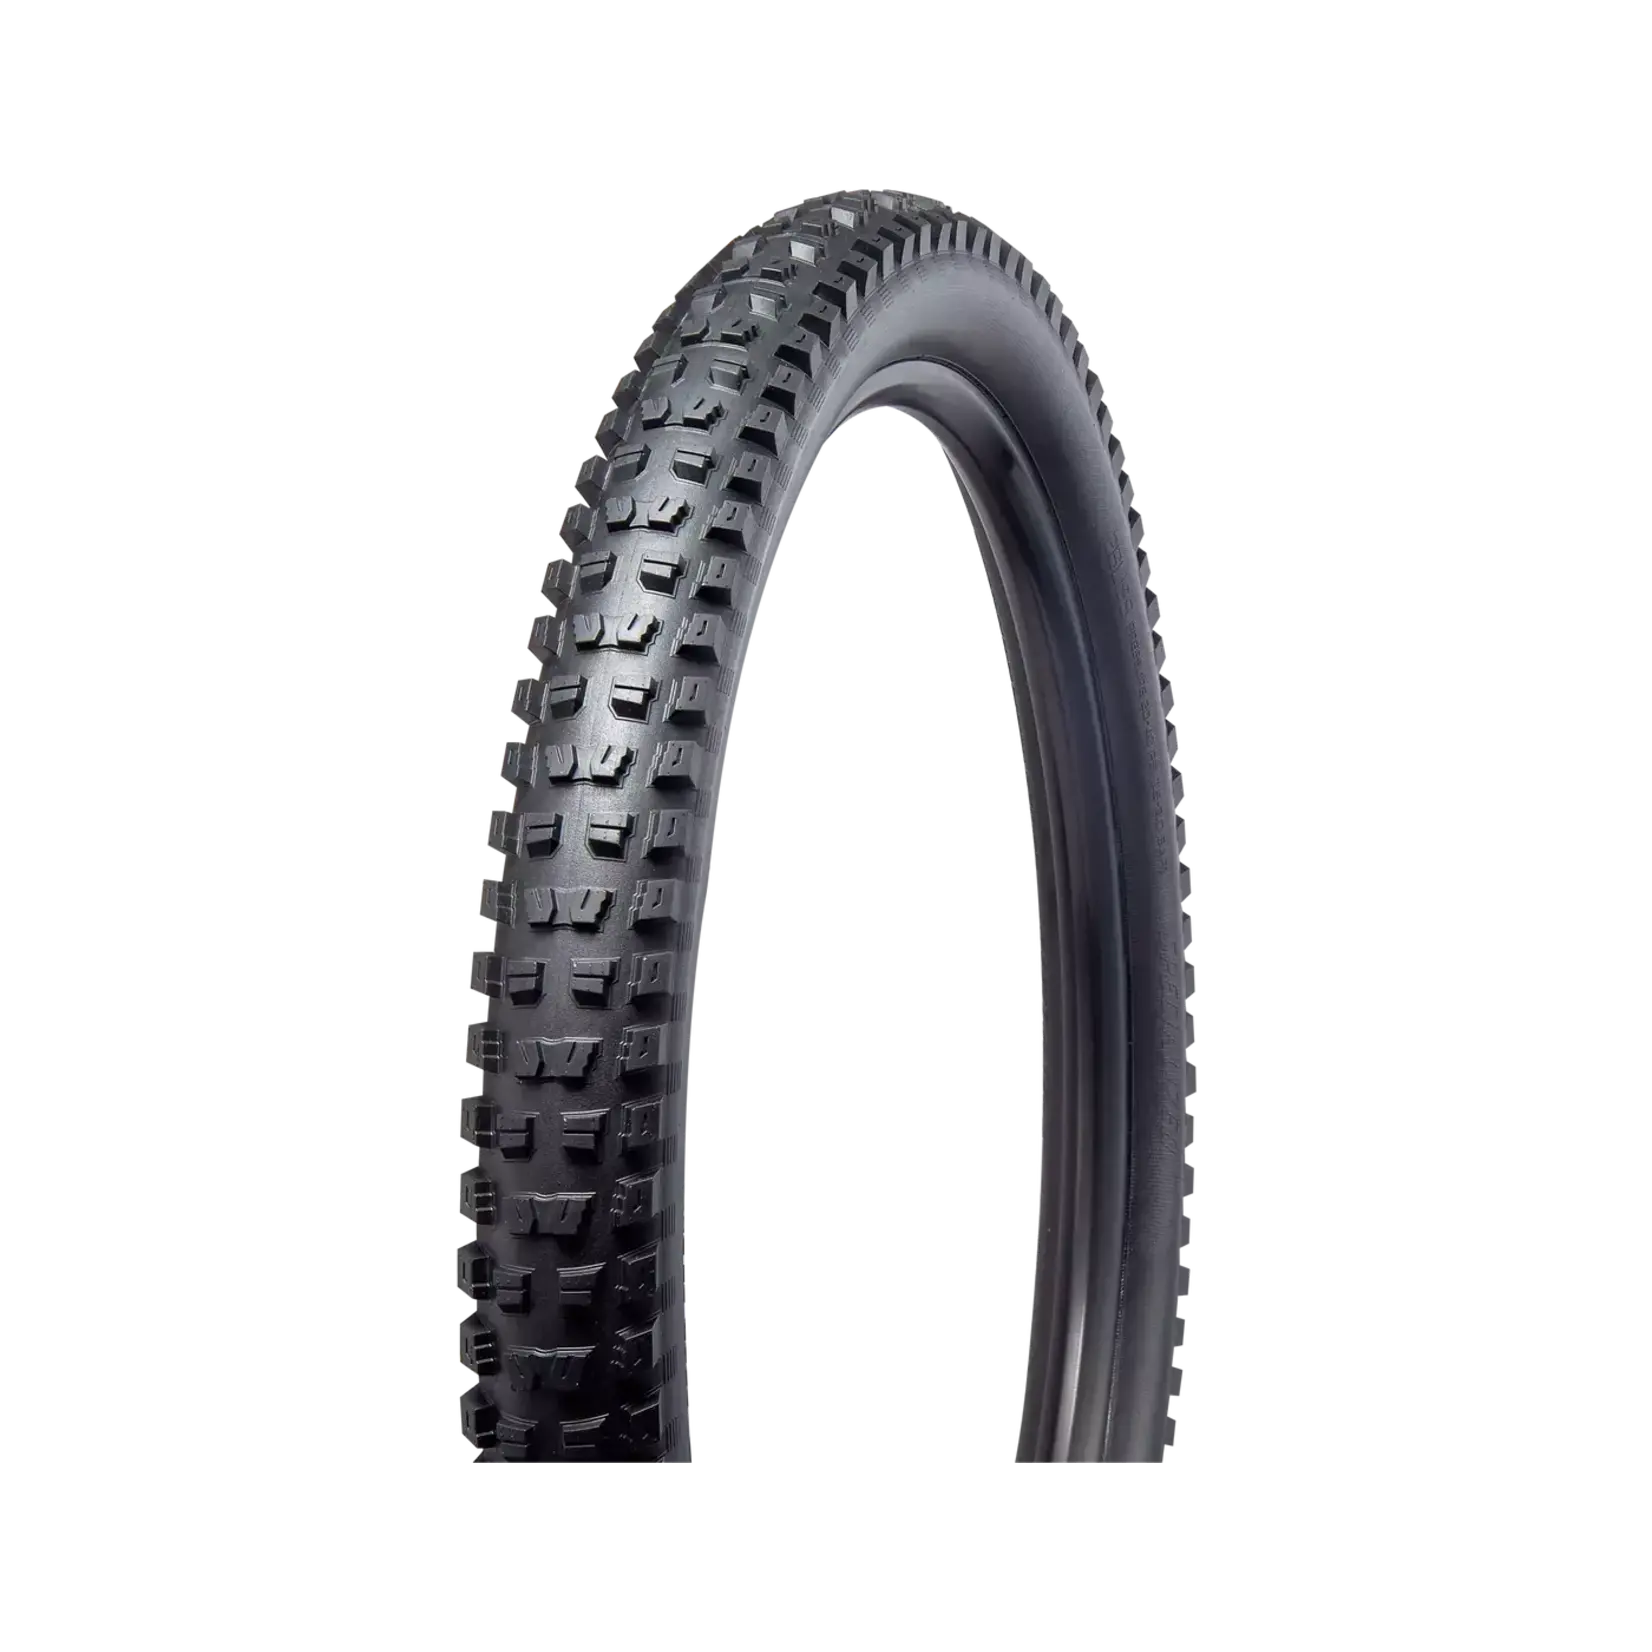 Specialized BUTCHER GRID TRAIL 2BR TIRE 27.5 x 2.8